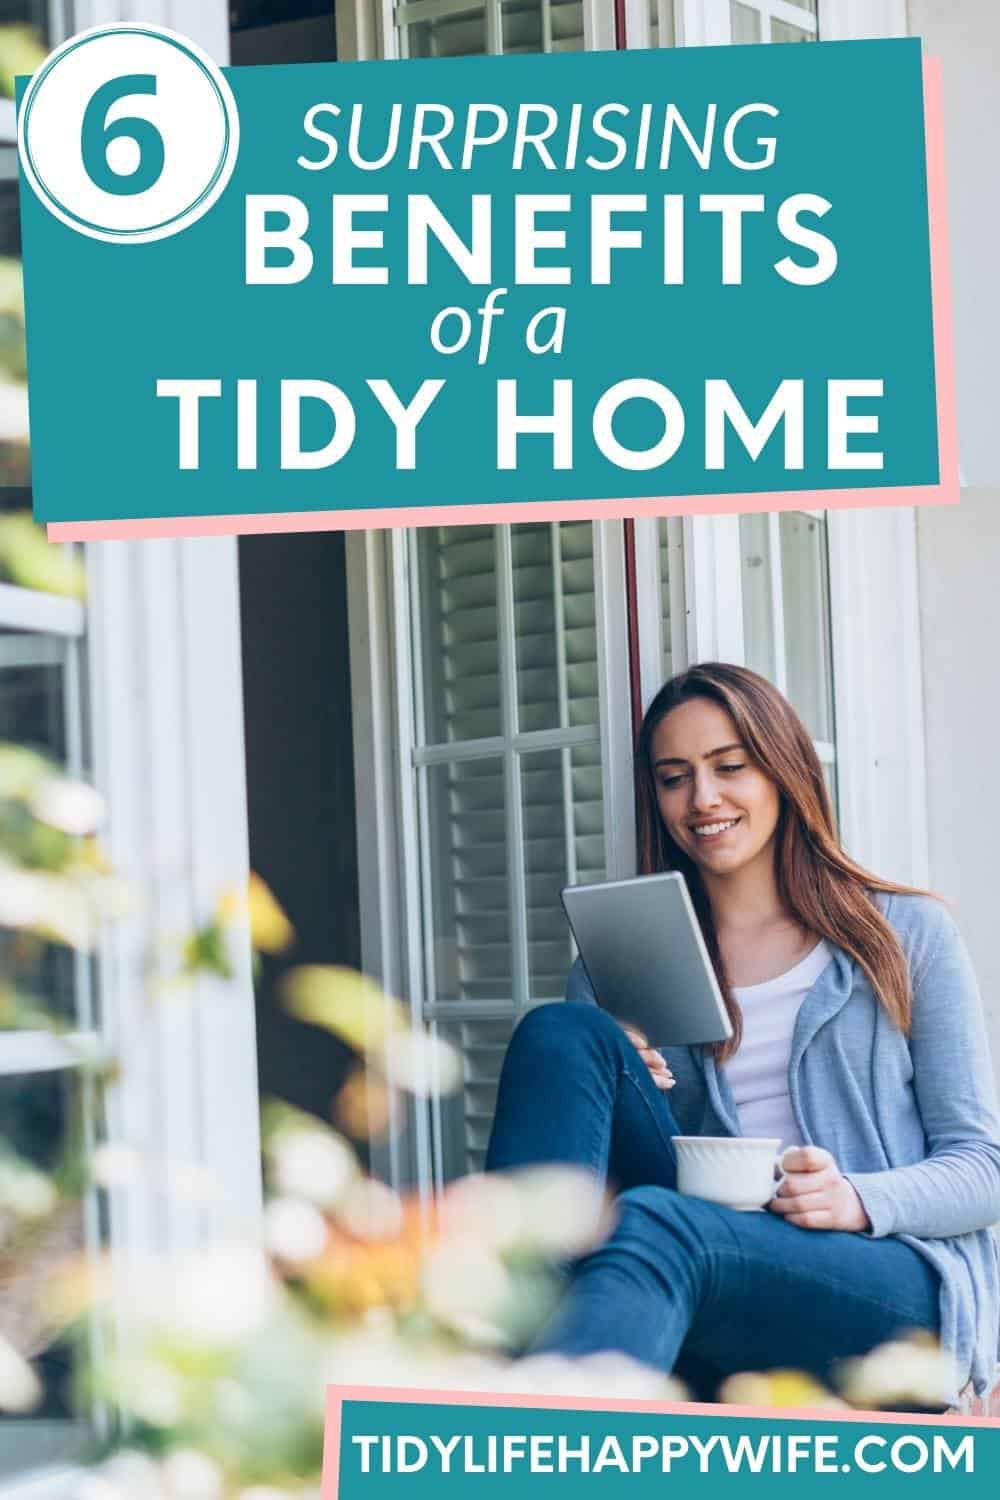 No motivation to declutter? The surprising benefits of a tidy home might just change your mind. Here are 6 great reasons to start tidying up right now. via @Tidylifehappywife